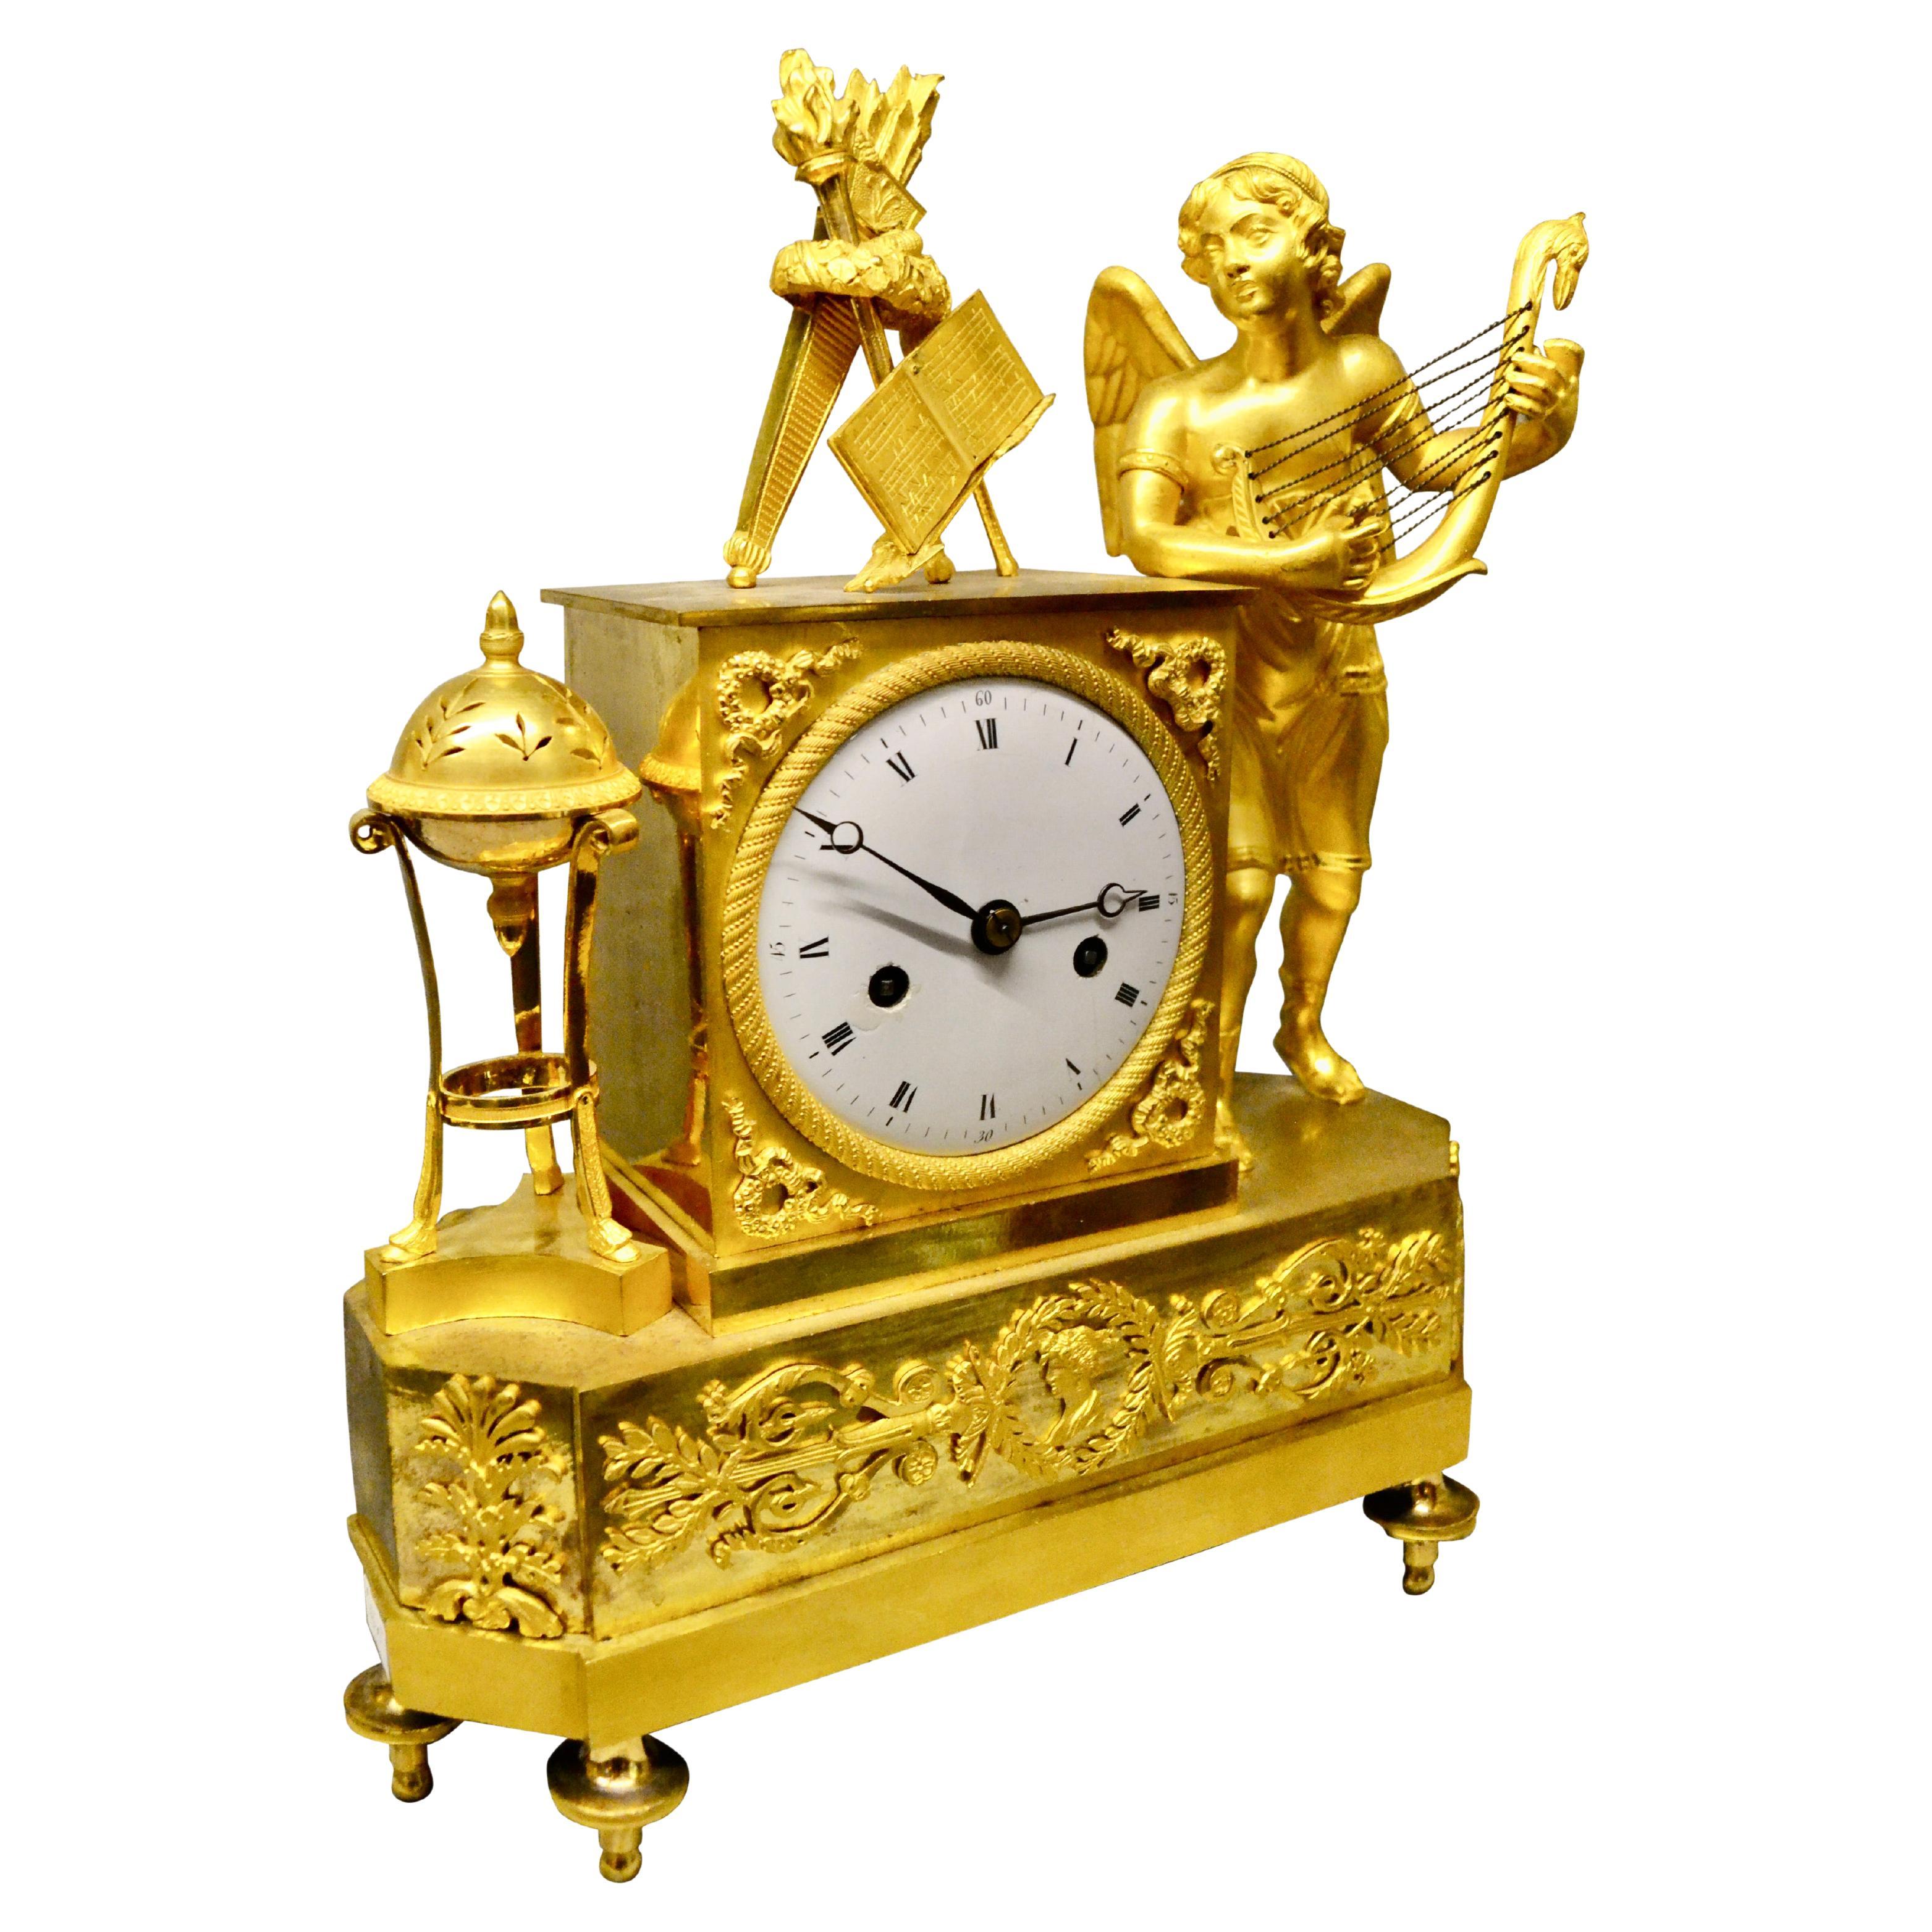 Period French Empire Mantle Clock Depicting a Winged Cupid Playing a Lute For Sale